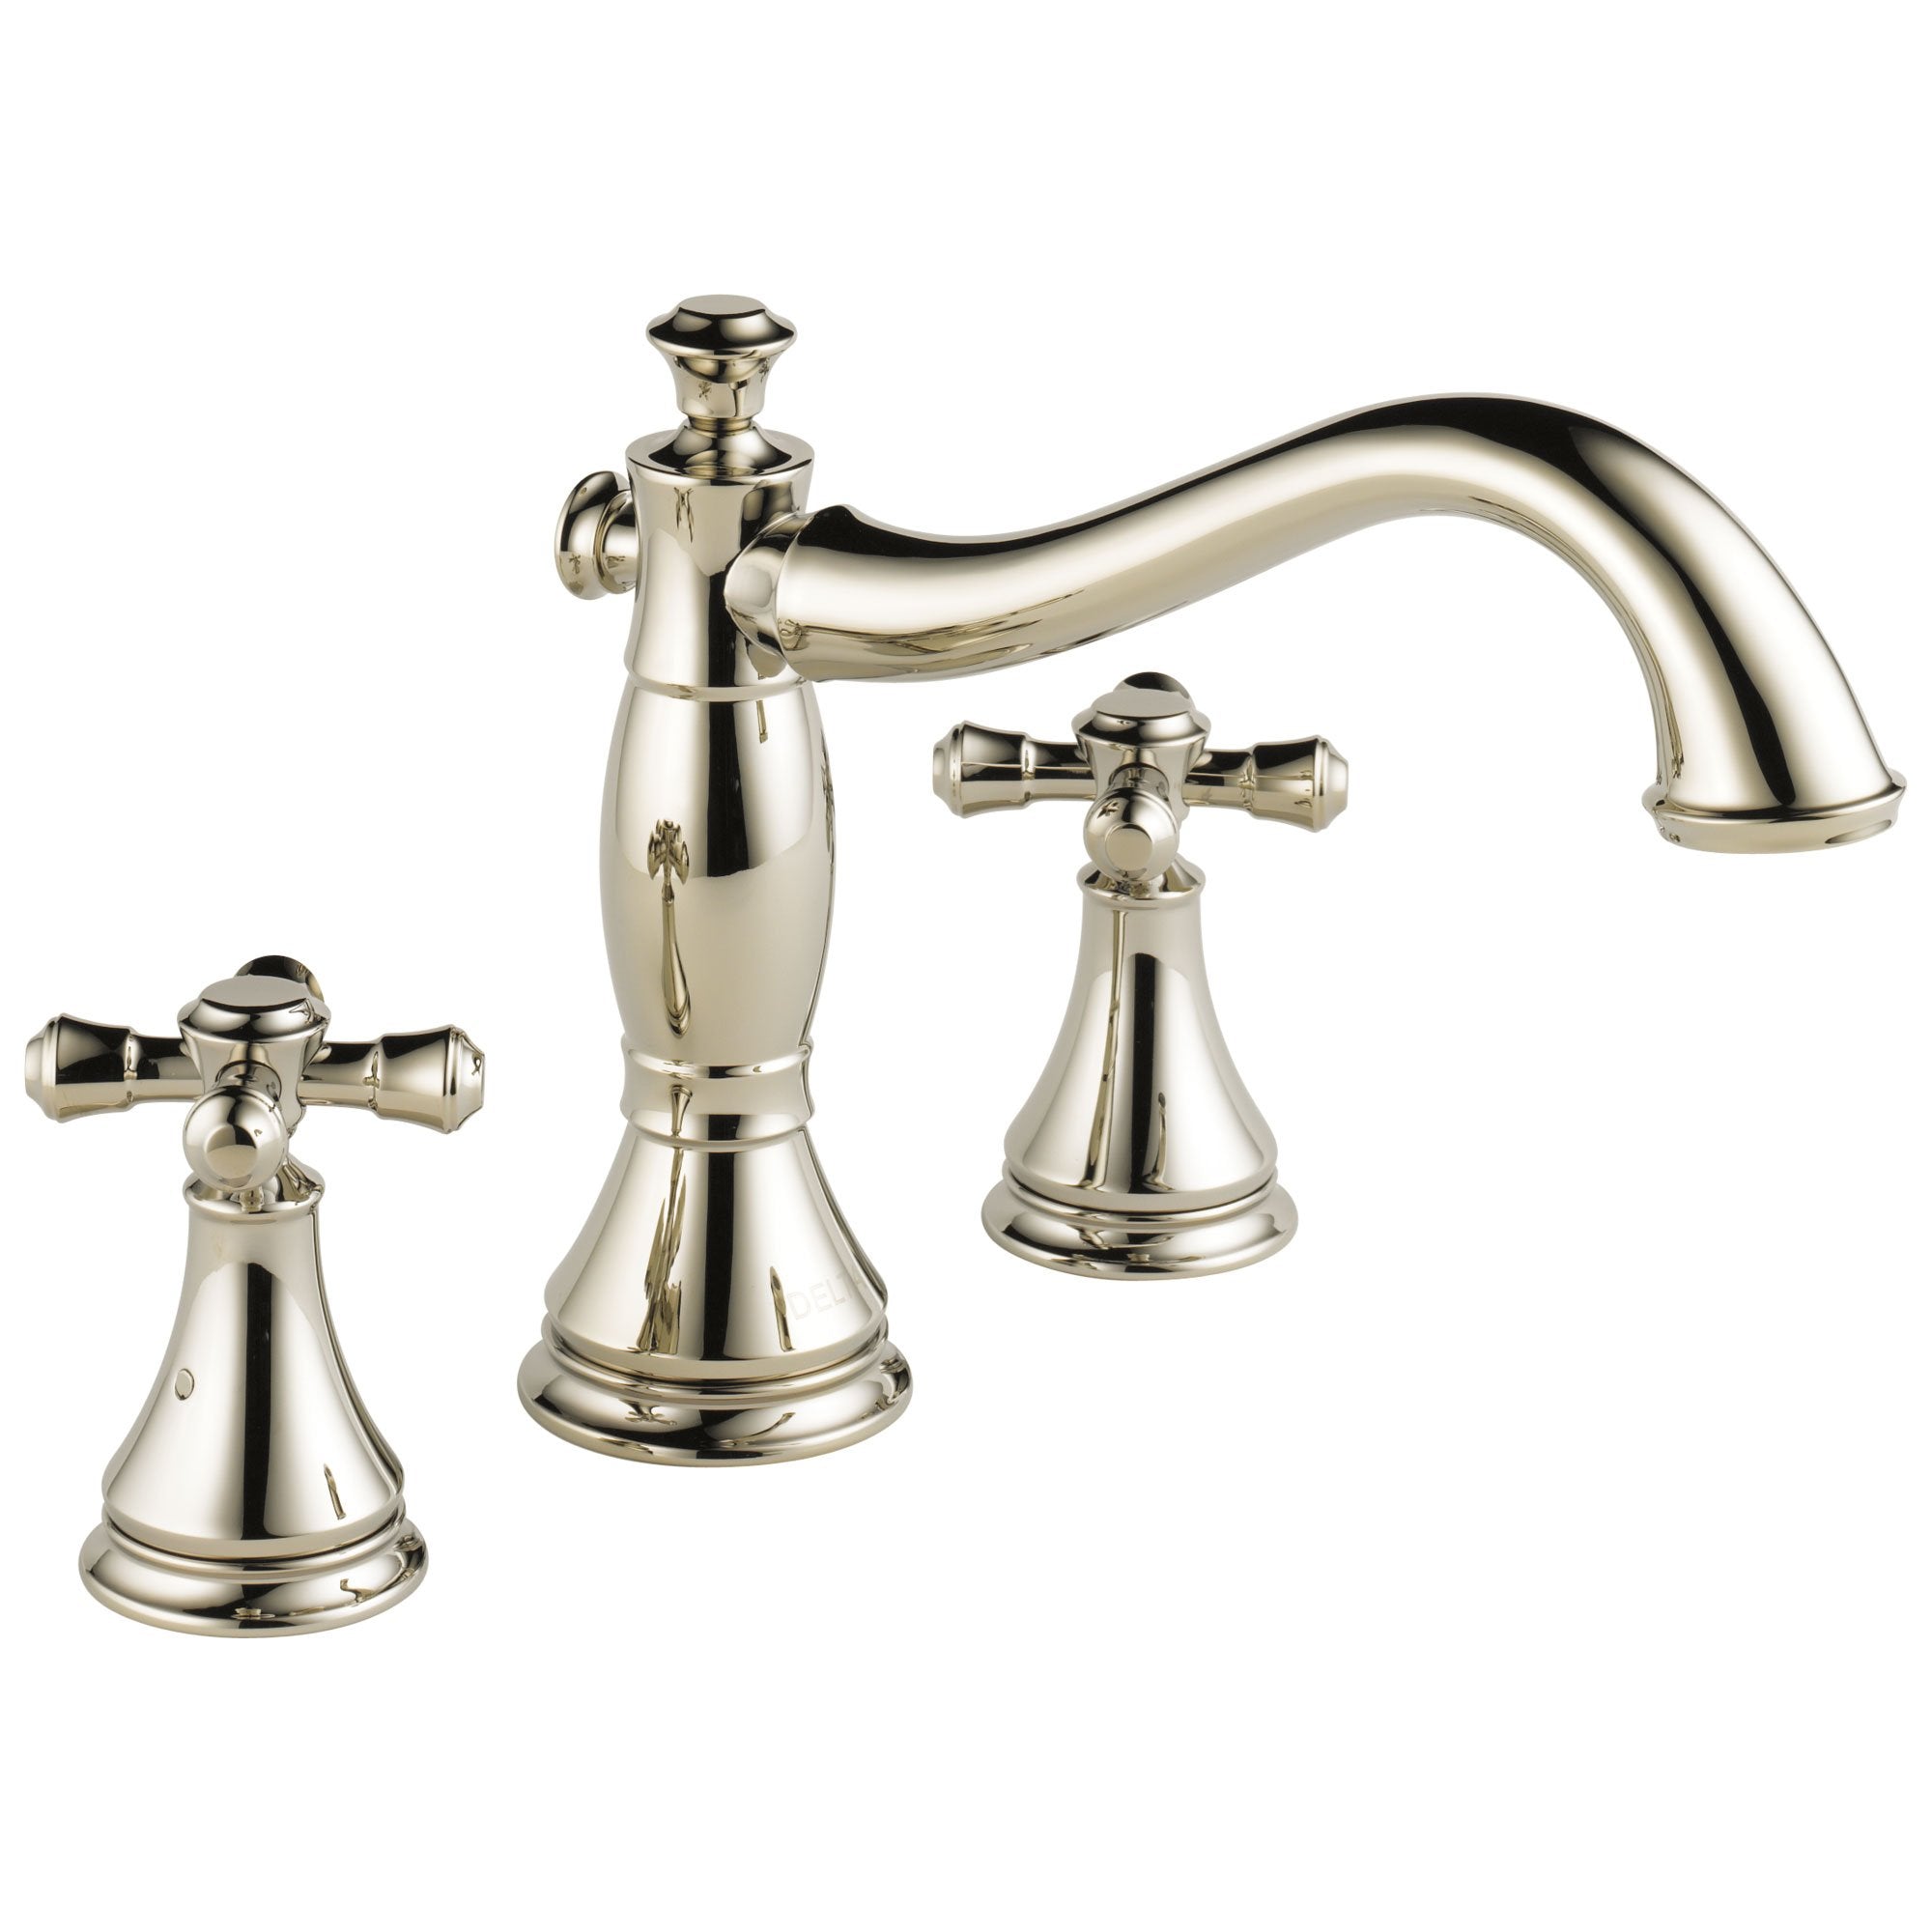 Delta Cassidy Collection Polished Nickel Finish Roman Tub Filler Faucet COMPLETE ITEM Includes (2) Cross Style Handles and Rough-in Valve D1433V